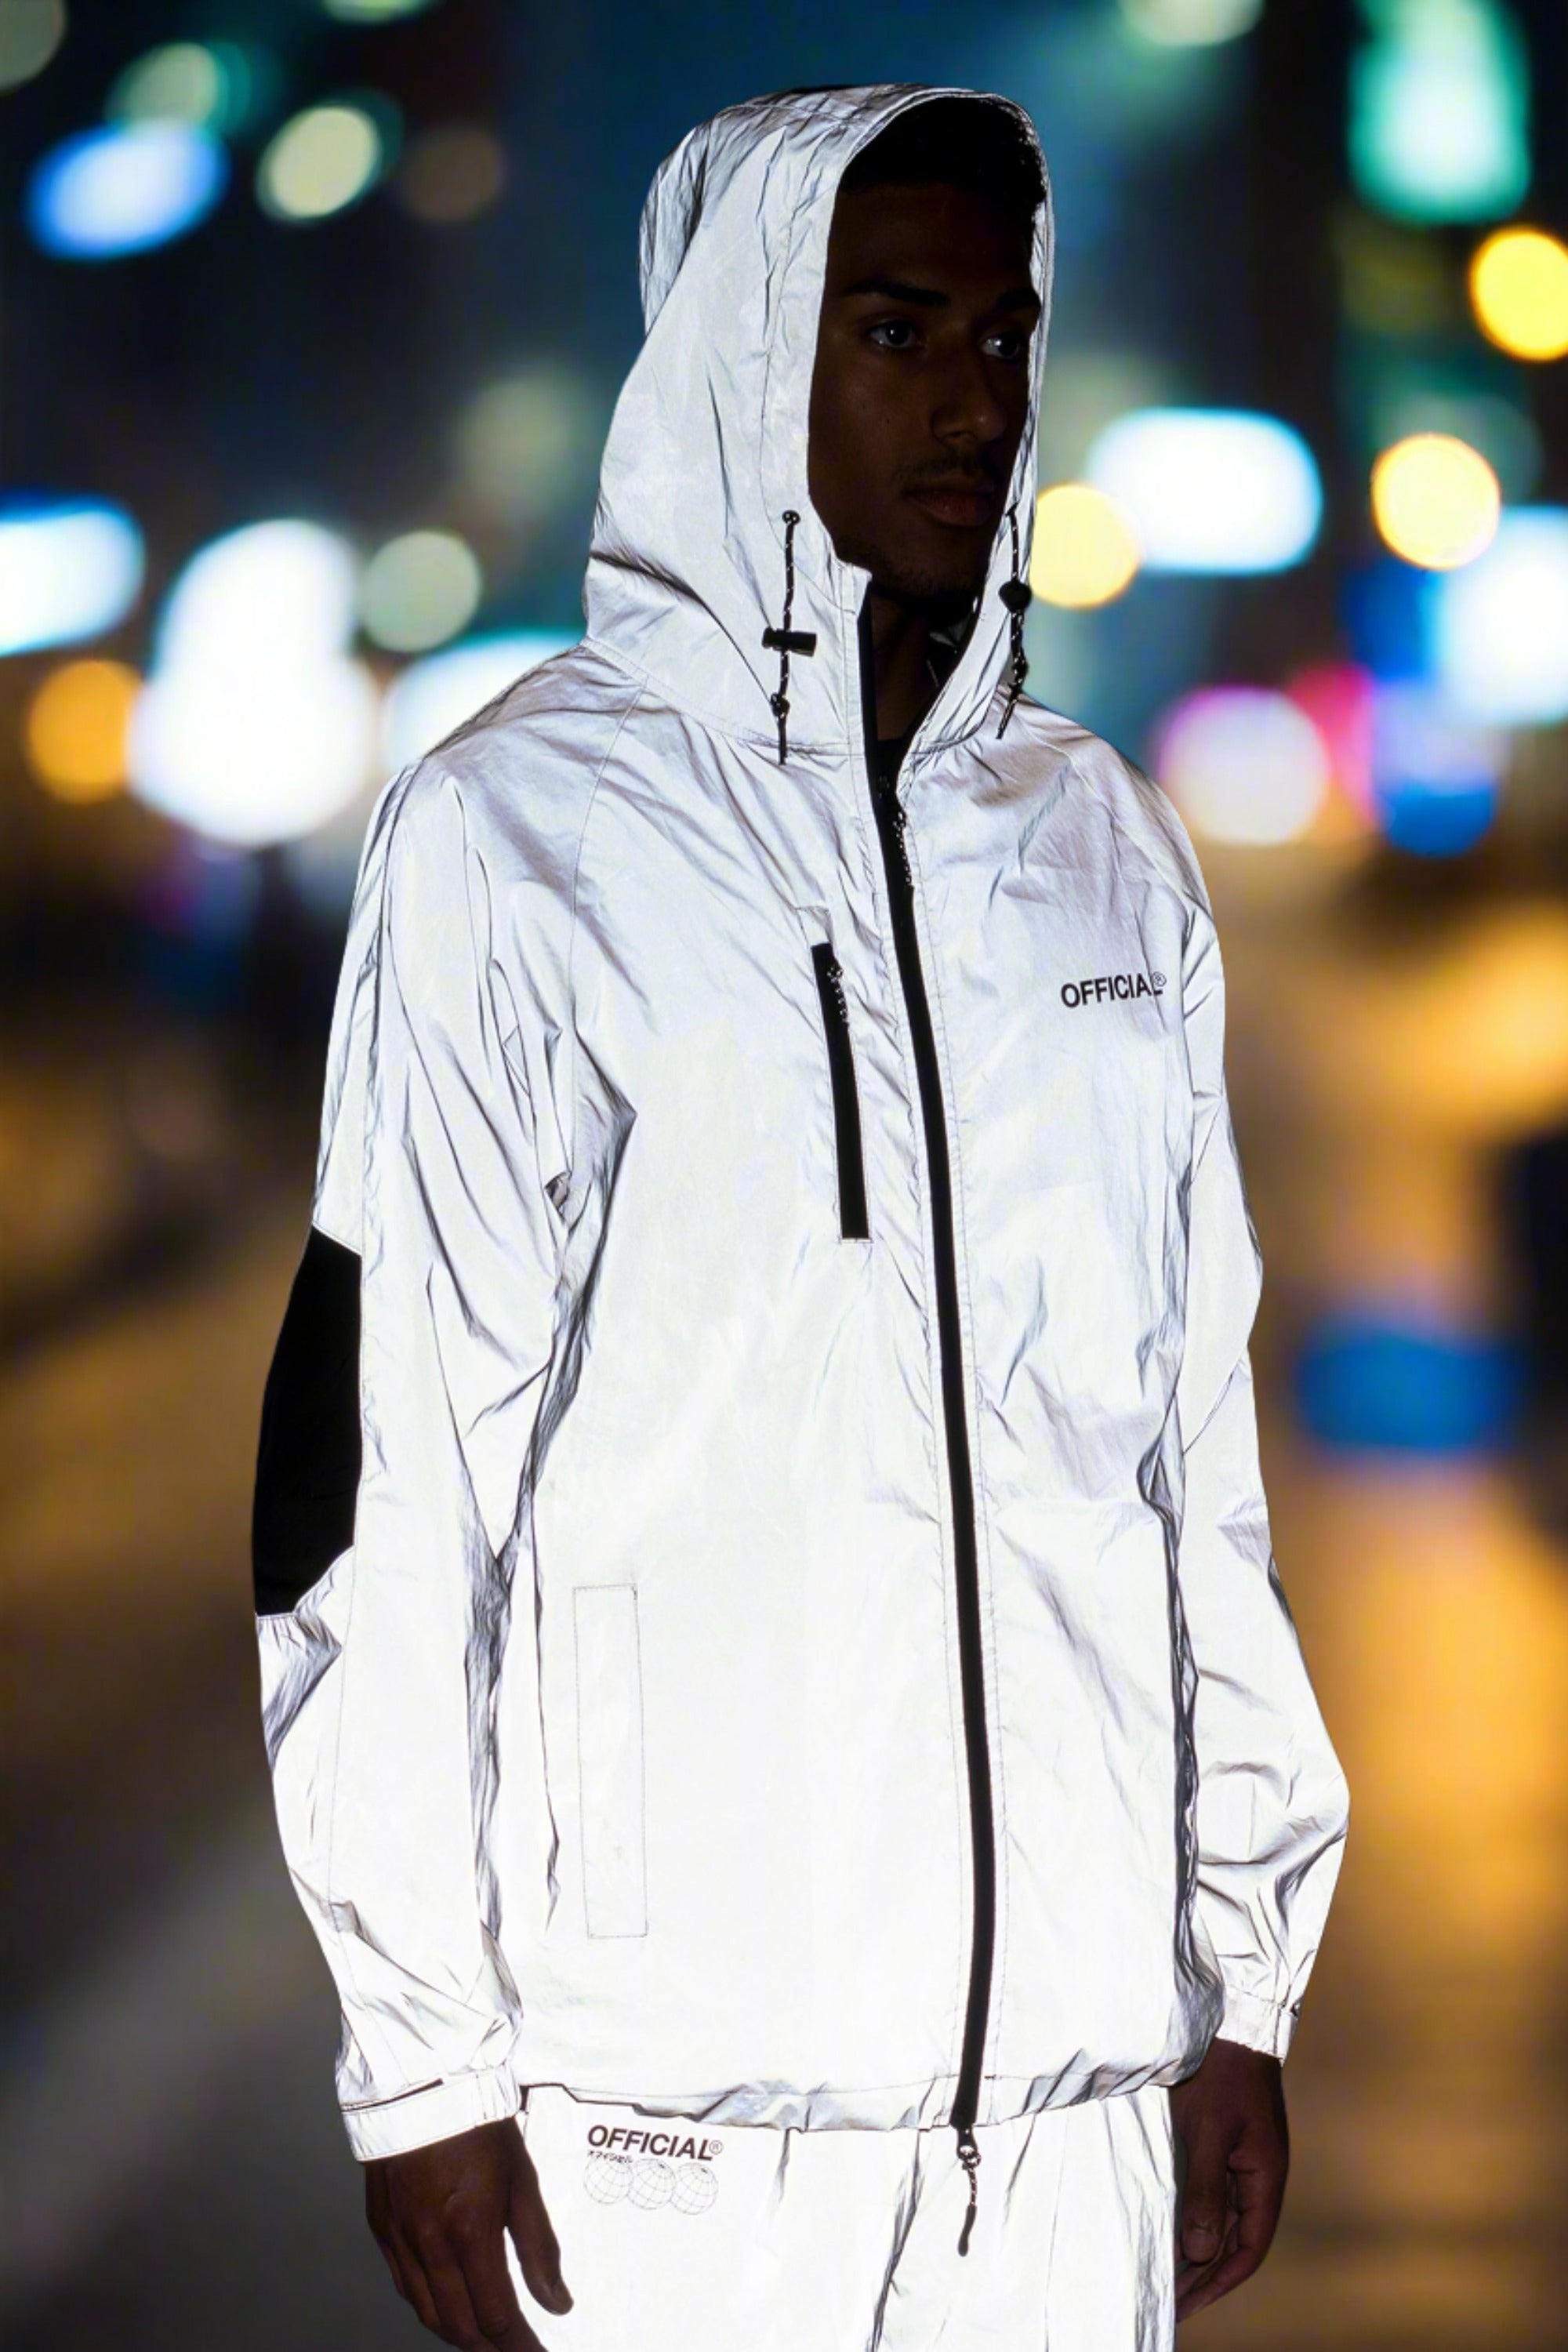 3M Silver Reflective Jacket - The Official Brand